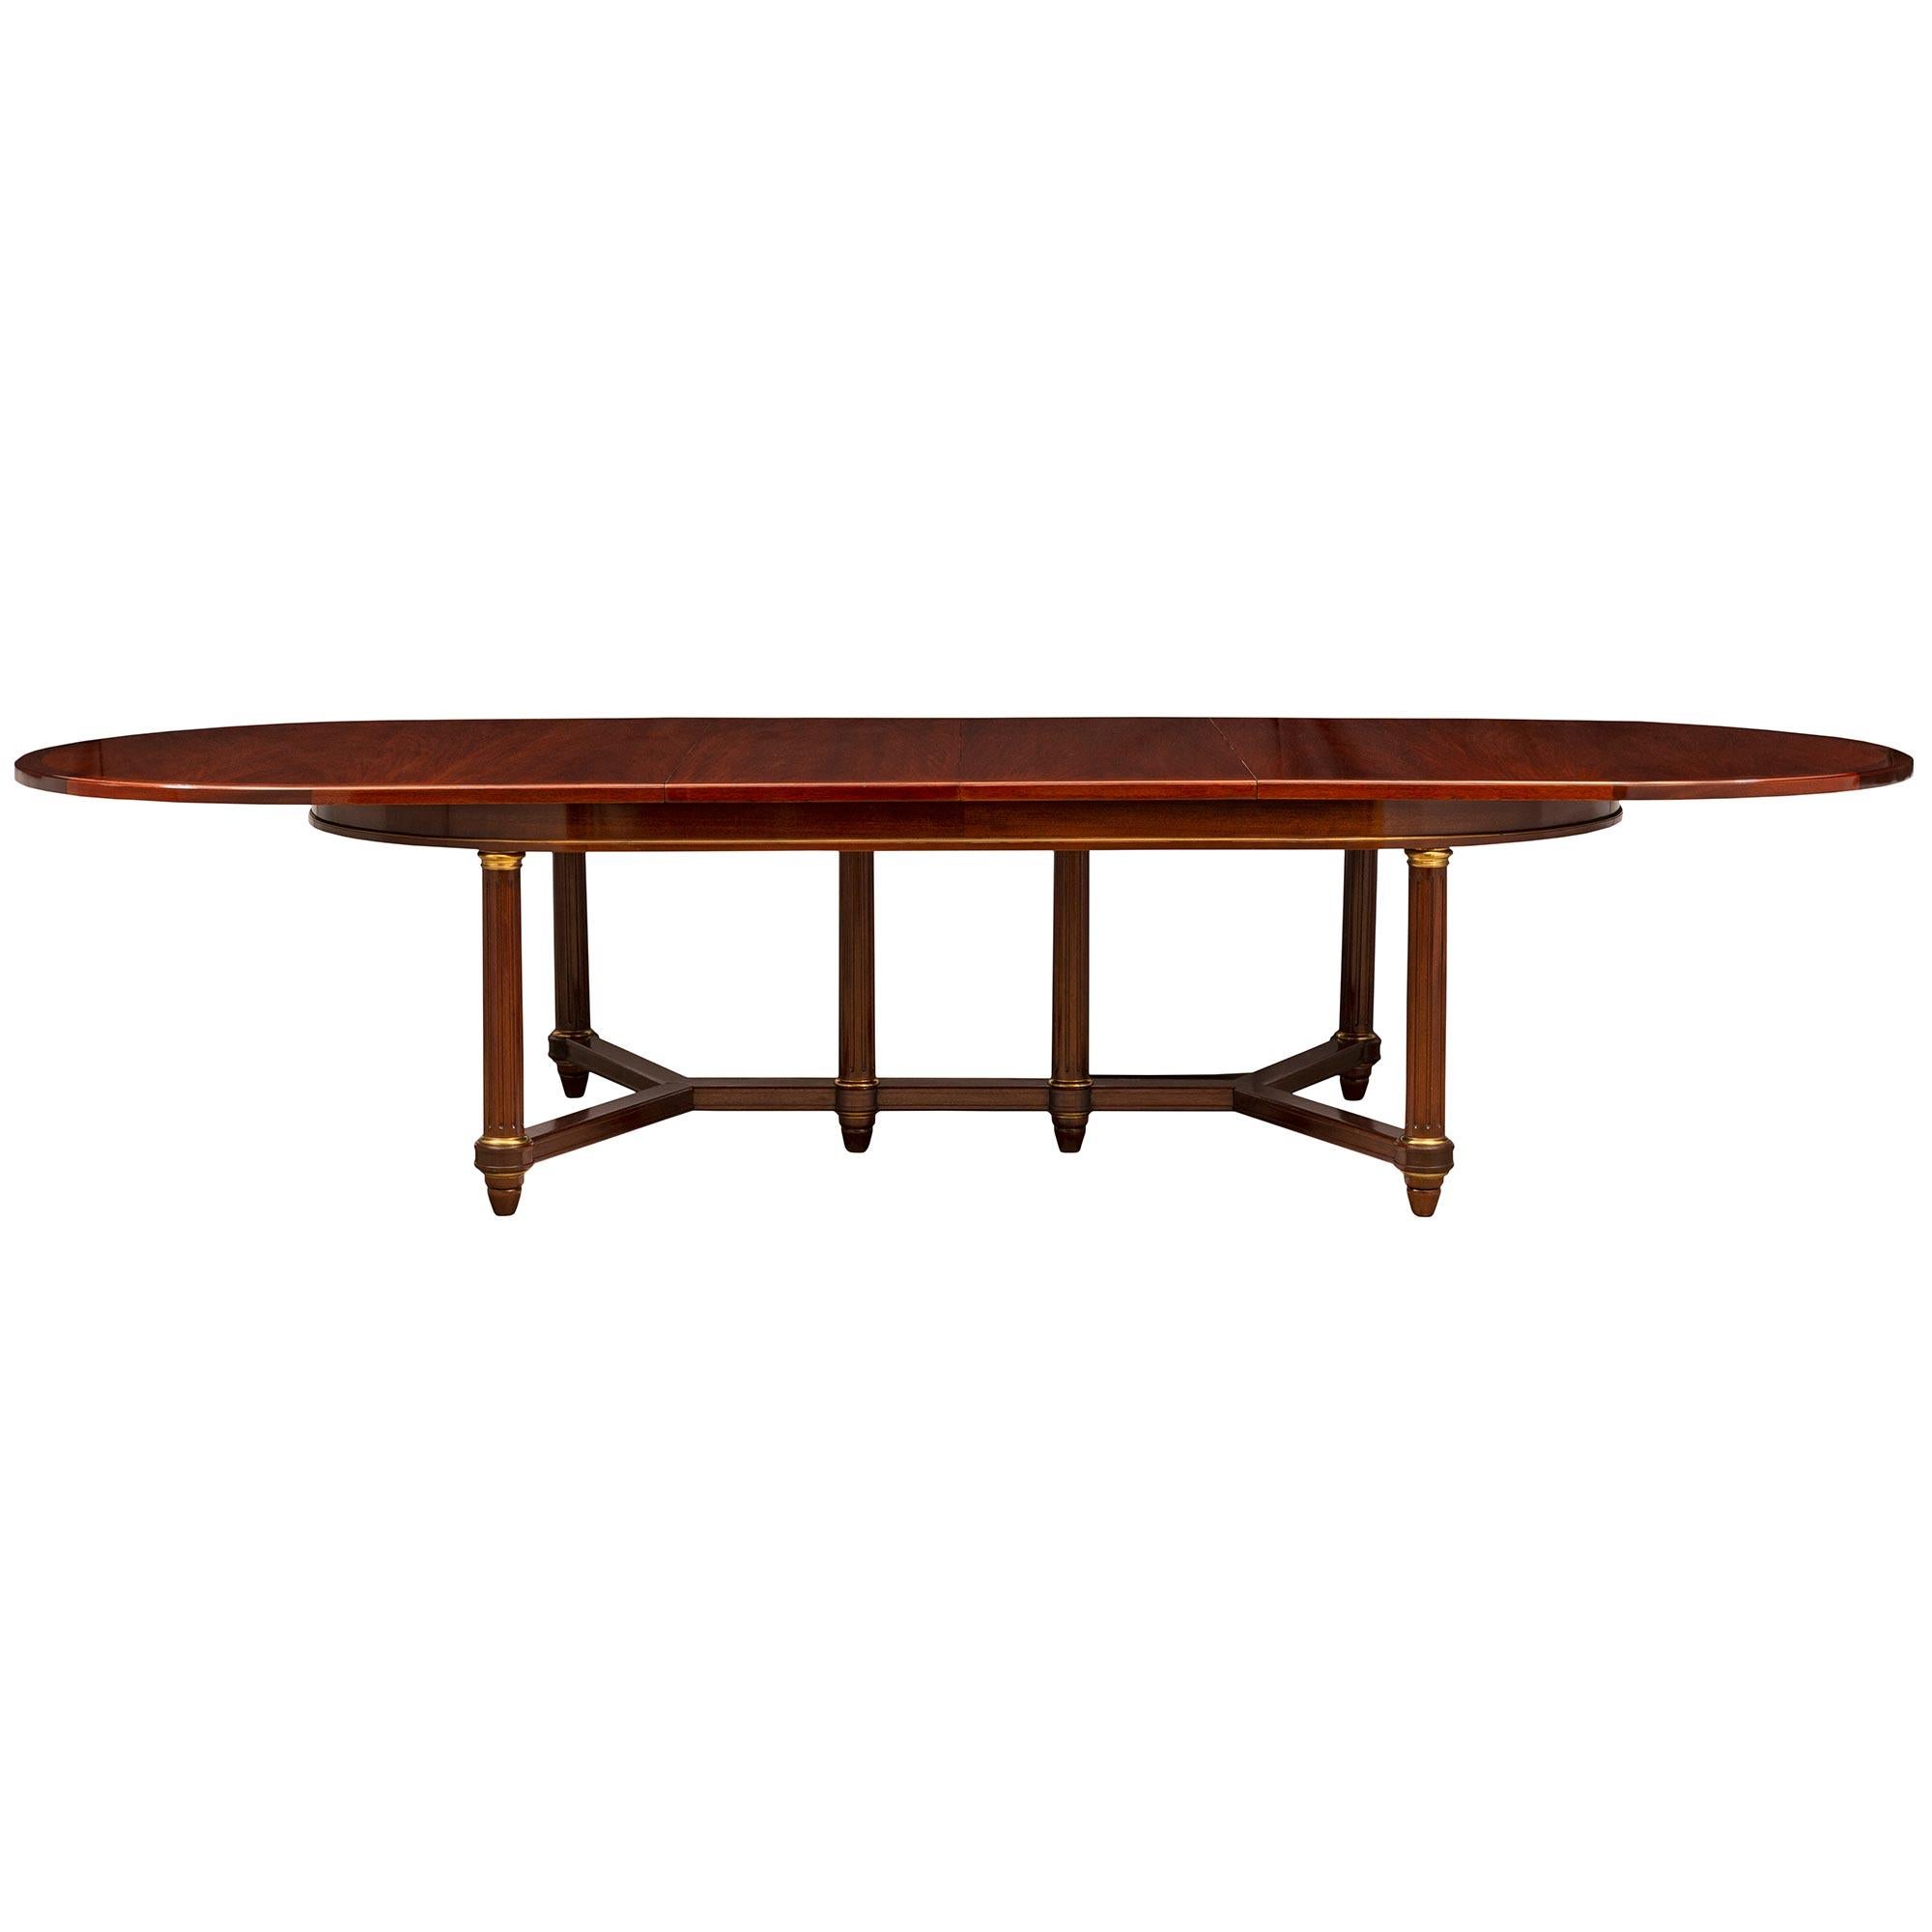 20th Century French Turn of the Century Empire St. Flamed Mahogany and Ormolu Dining Table For Sale